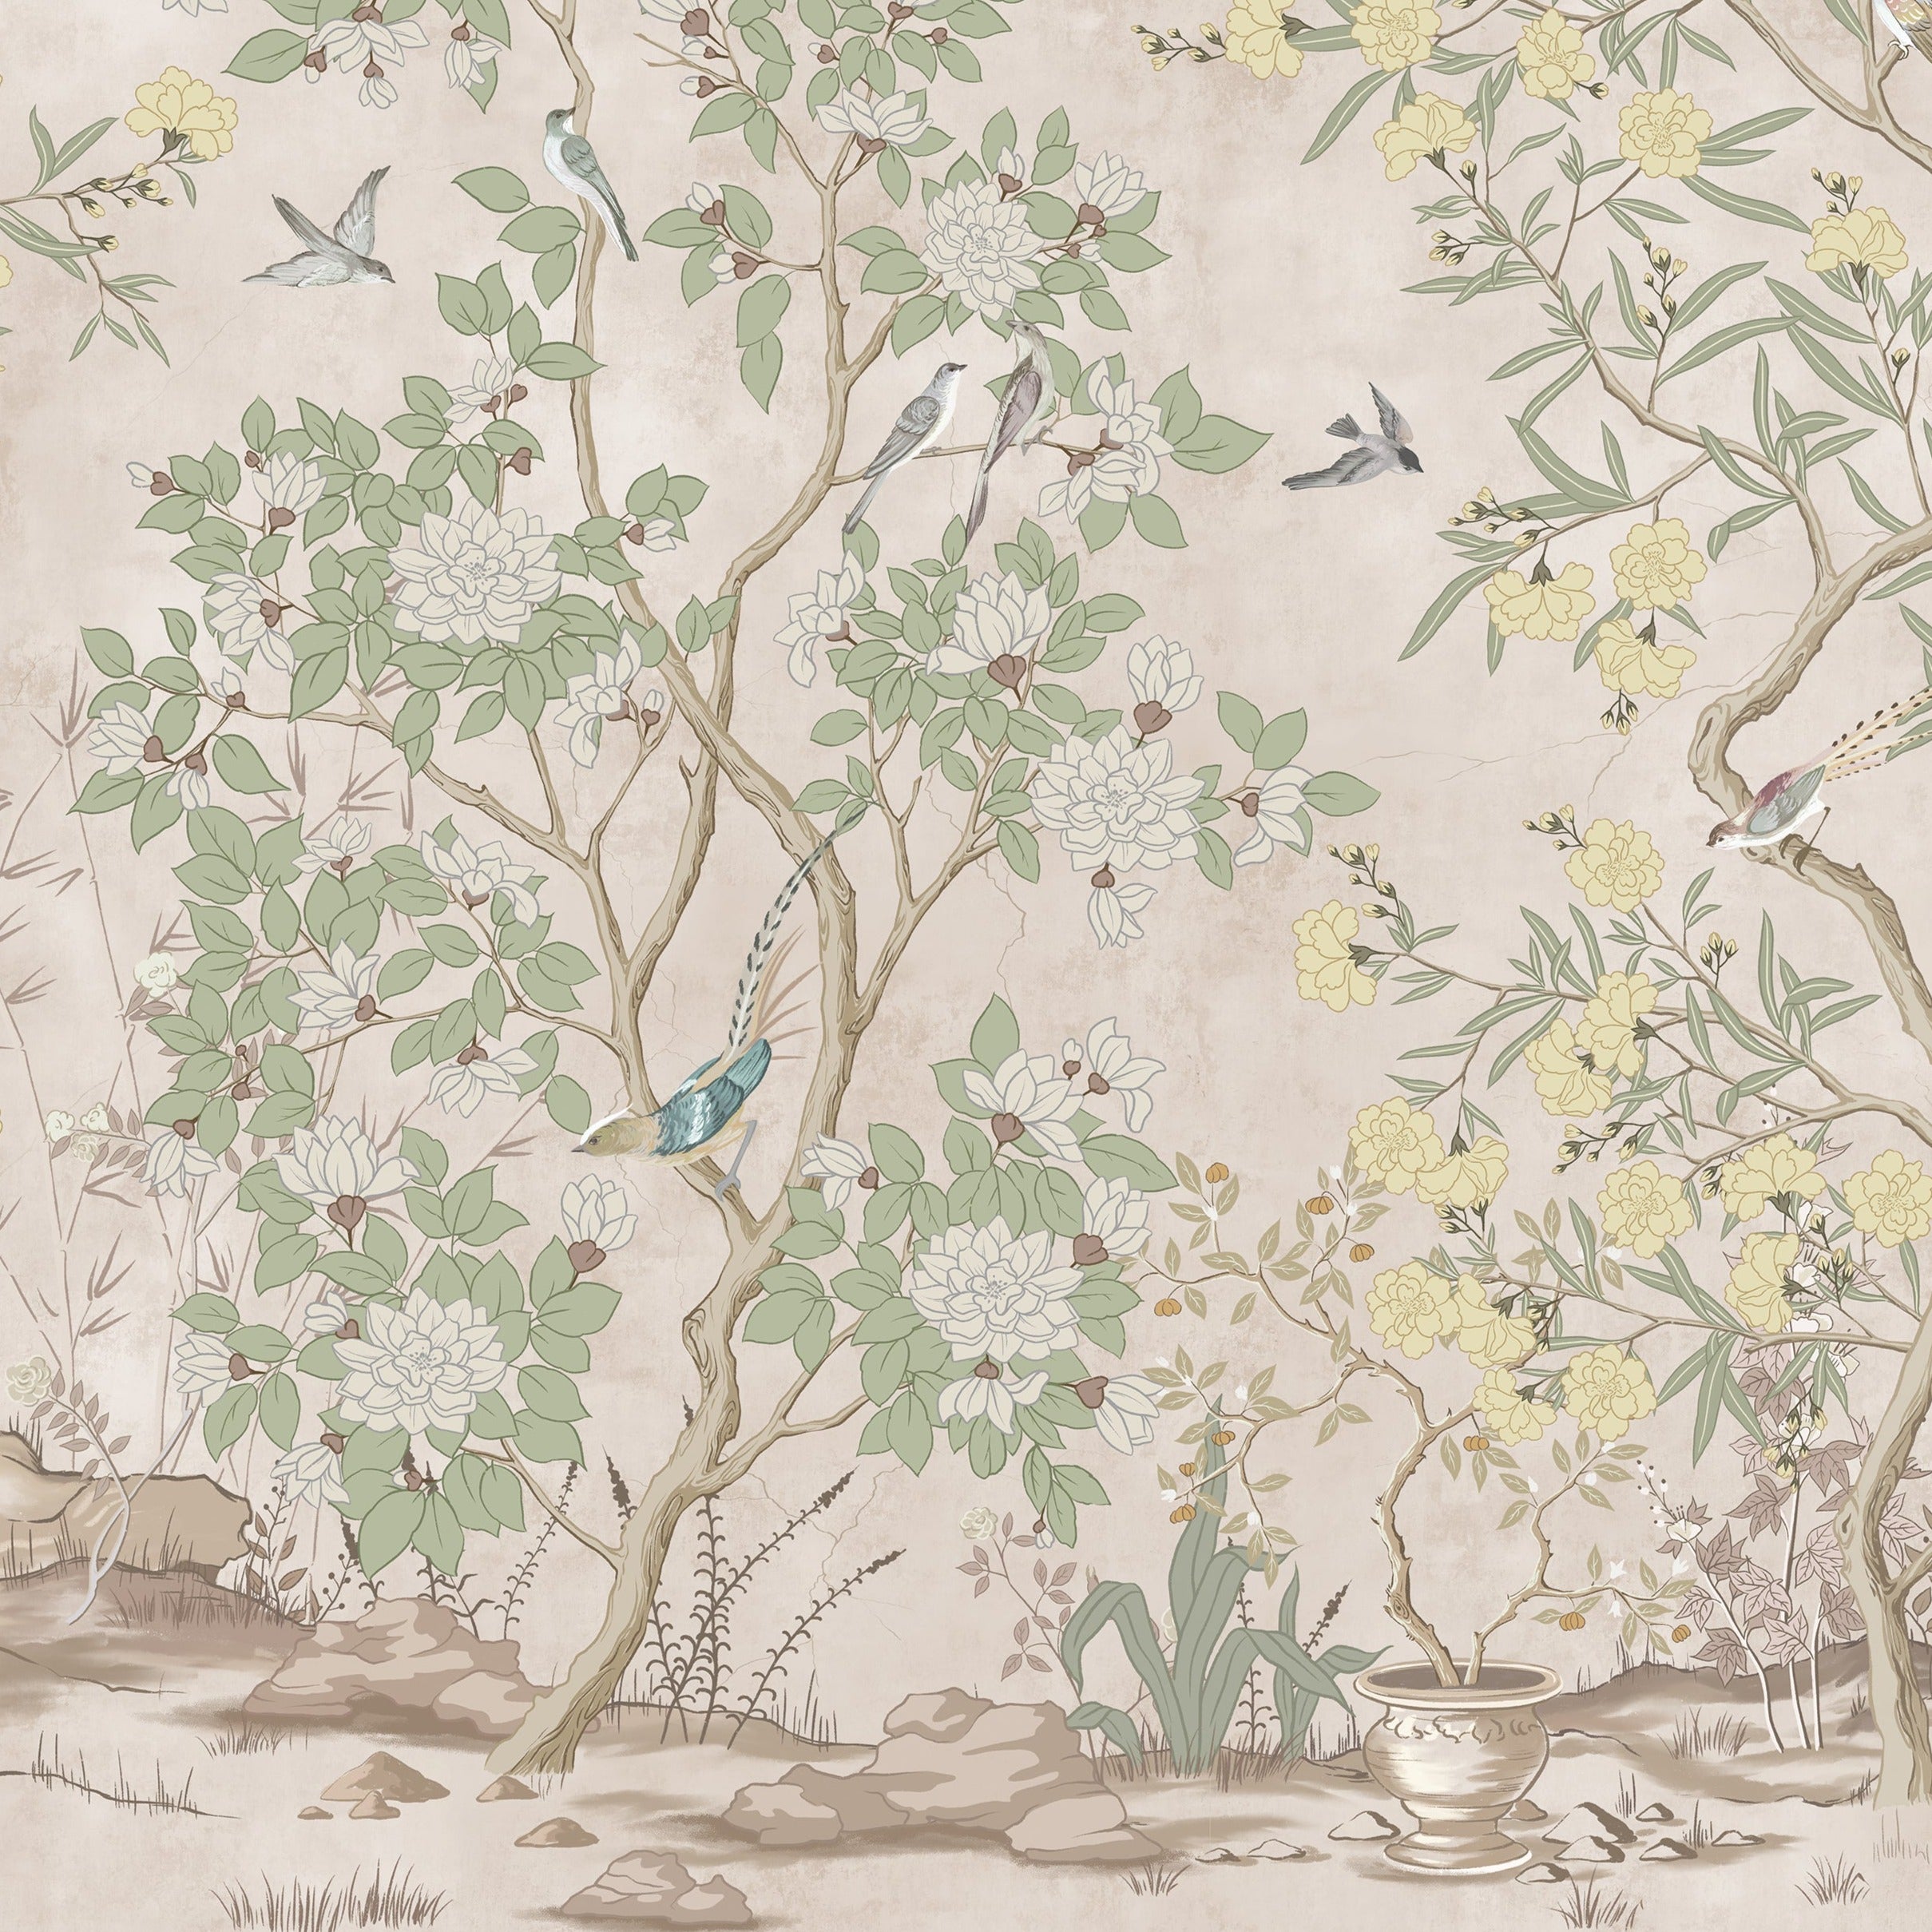 Image of chinoiserie wallpaper showcasing a detailed and stylized depiction of a forest scene with slender trees, blooming flowers, and various birds in flight or perched, all rendered in a muted color palette against a faded beige background